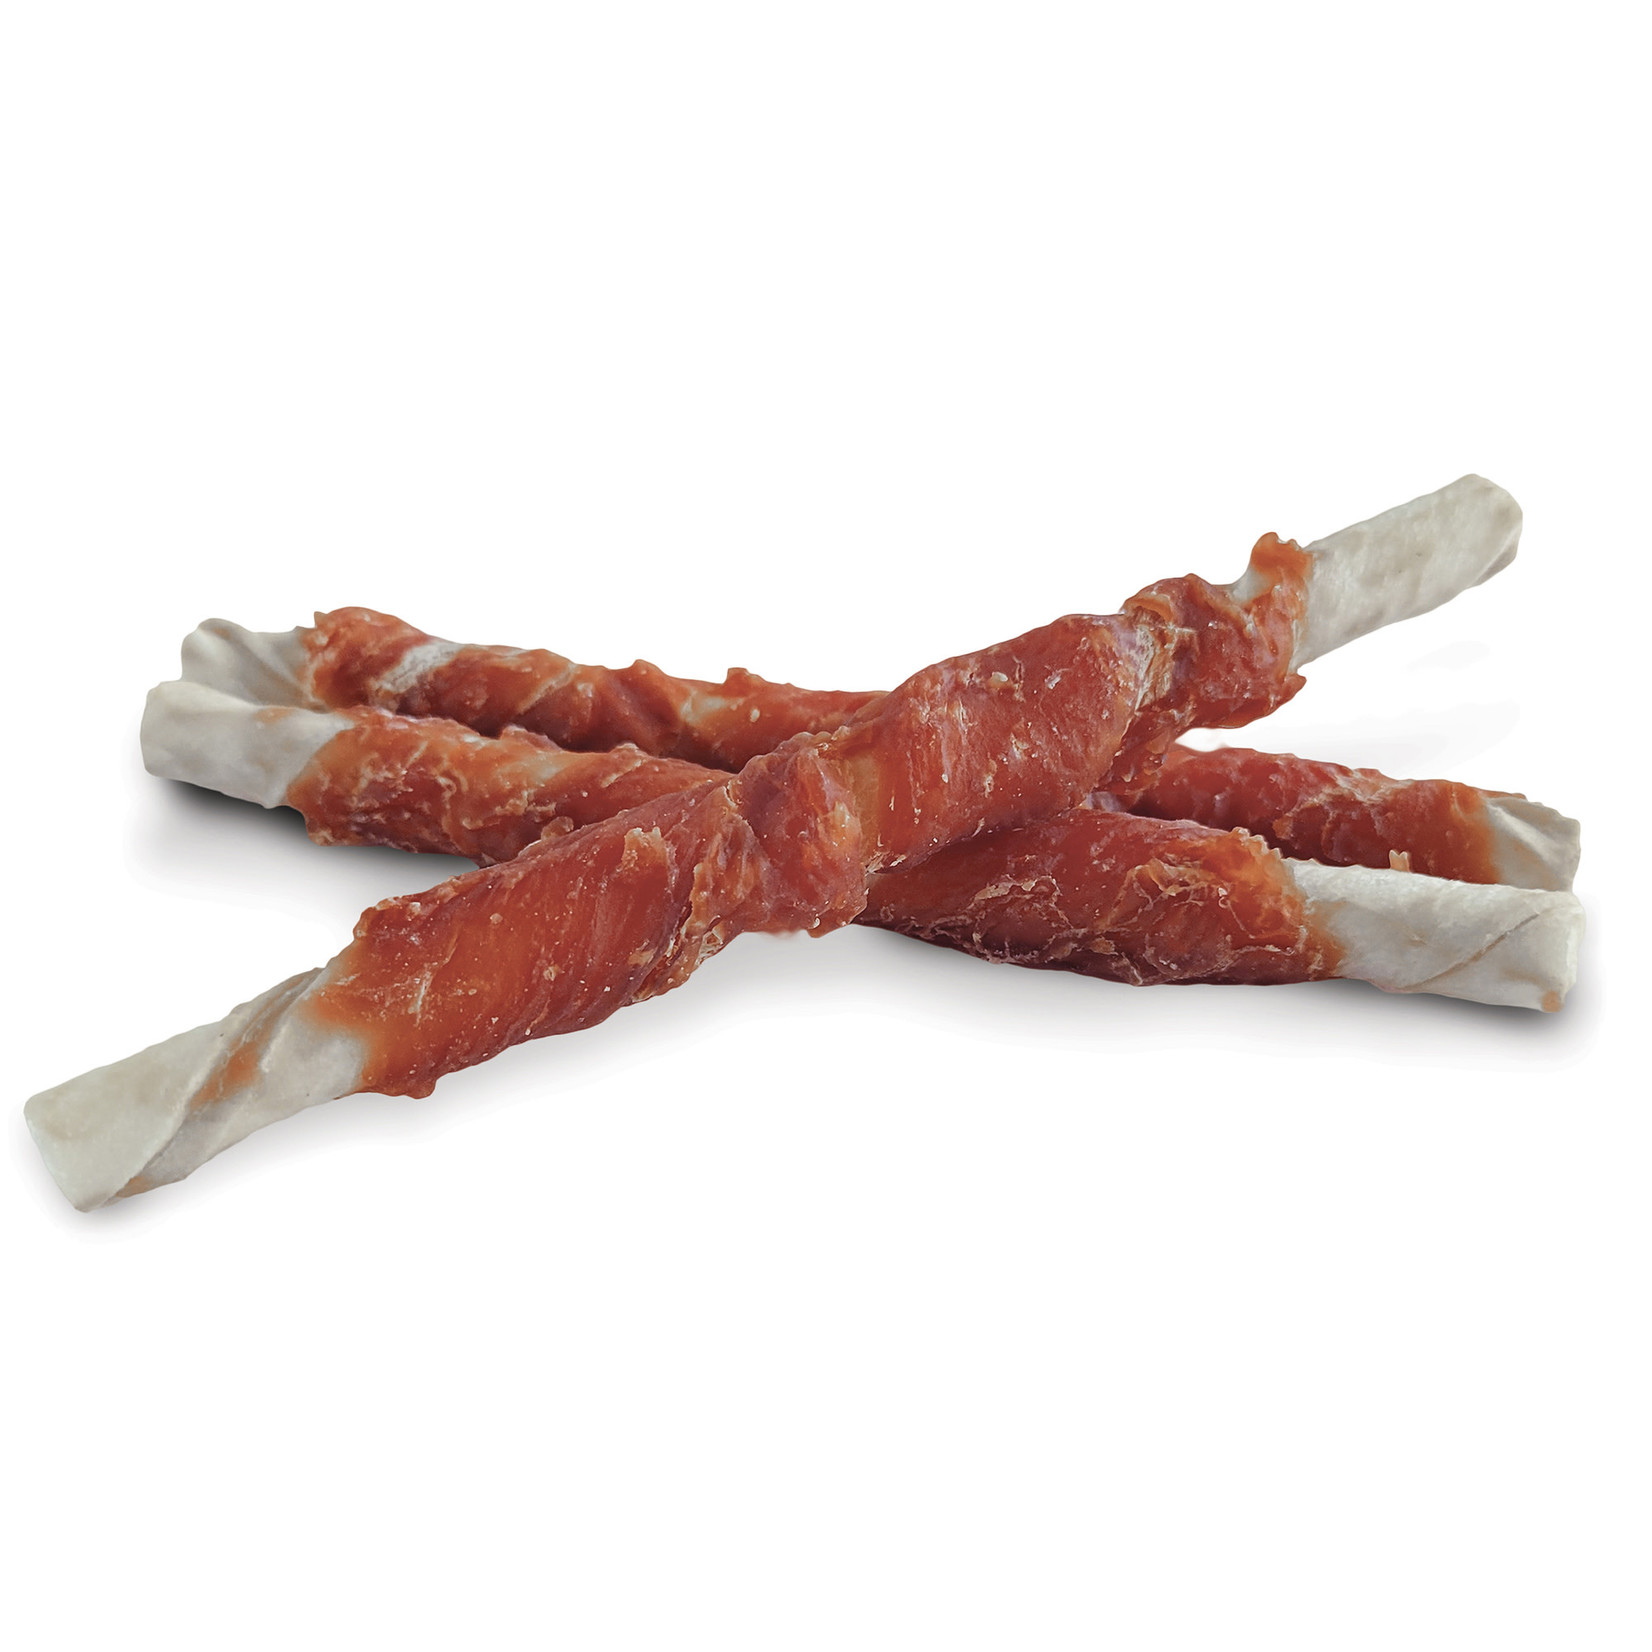 DOG IT Dogit Snack Bar Rawhide - Chicken-Wrapped Twists - 6 pcs (10 cm/4 in)